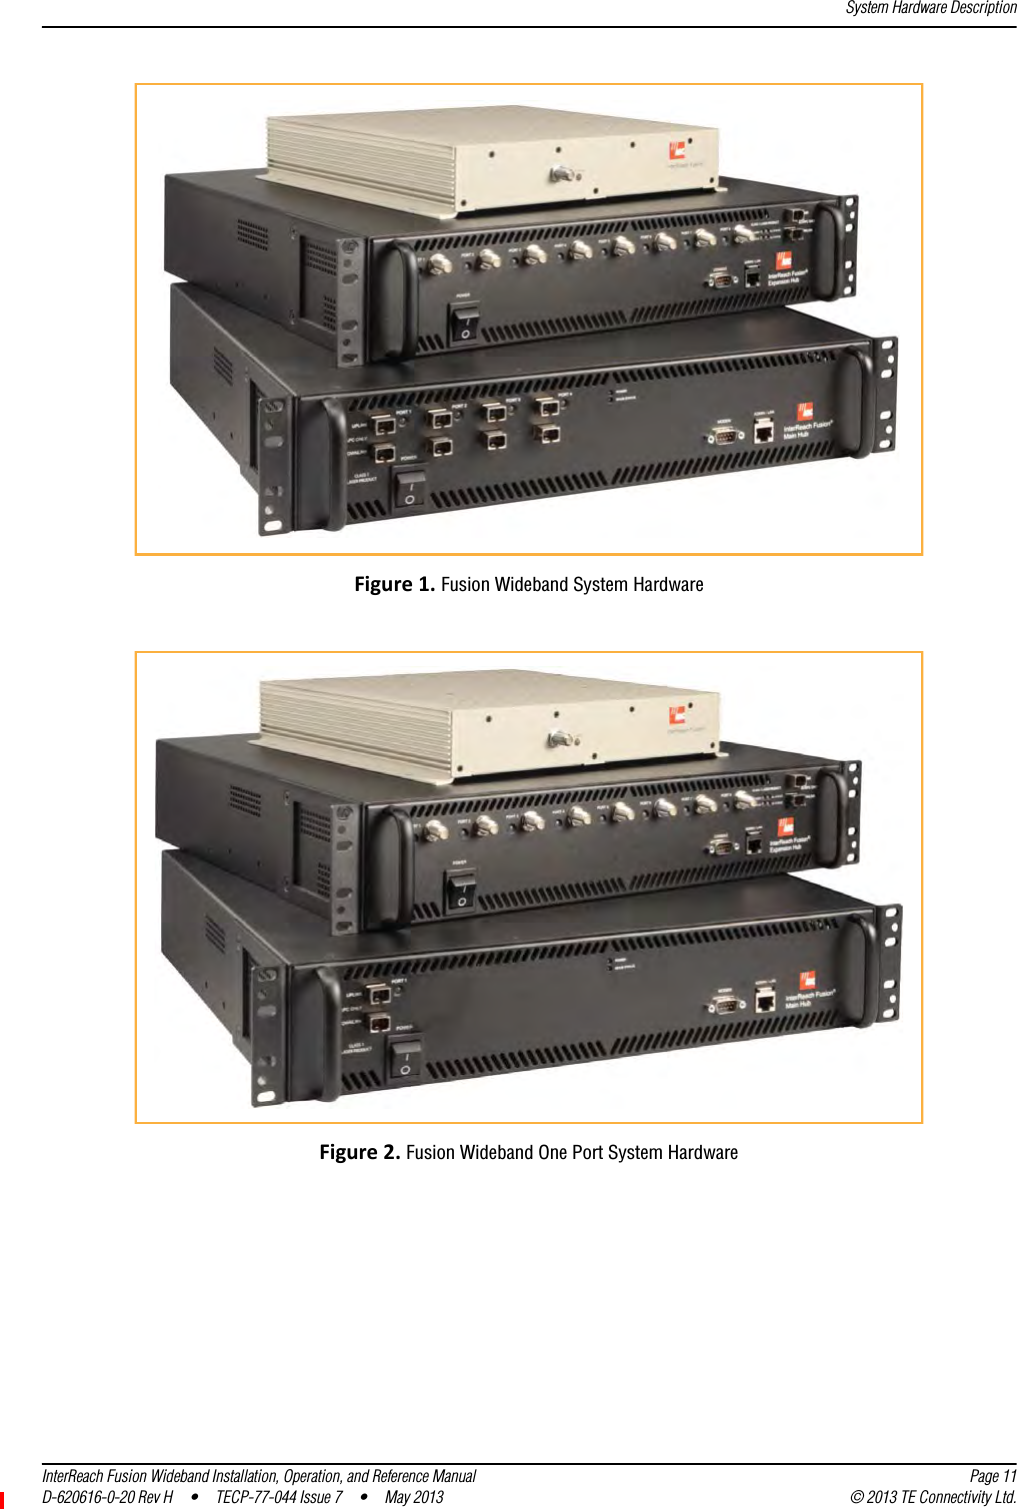 System Hardware DescriptionInterReach Fusion Wideband Installation, Operation, and Reference Manual Page 11D-620616-0-20 Rev H • TECP-77-044 Issue 7  •  May 2013 © 2013 TE Connectivity Ltd.Figure1.Fusion Wideband System HardwareFigure2.Fusion Wideband One Port System Hardware